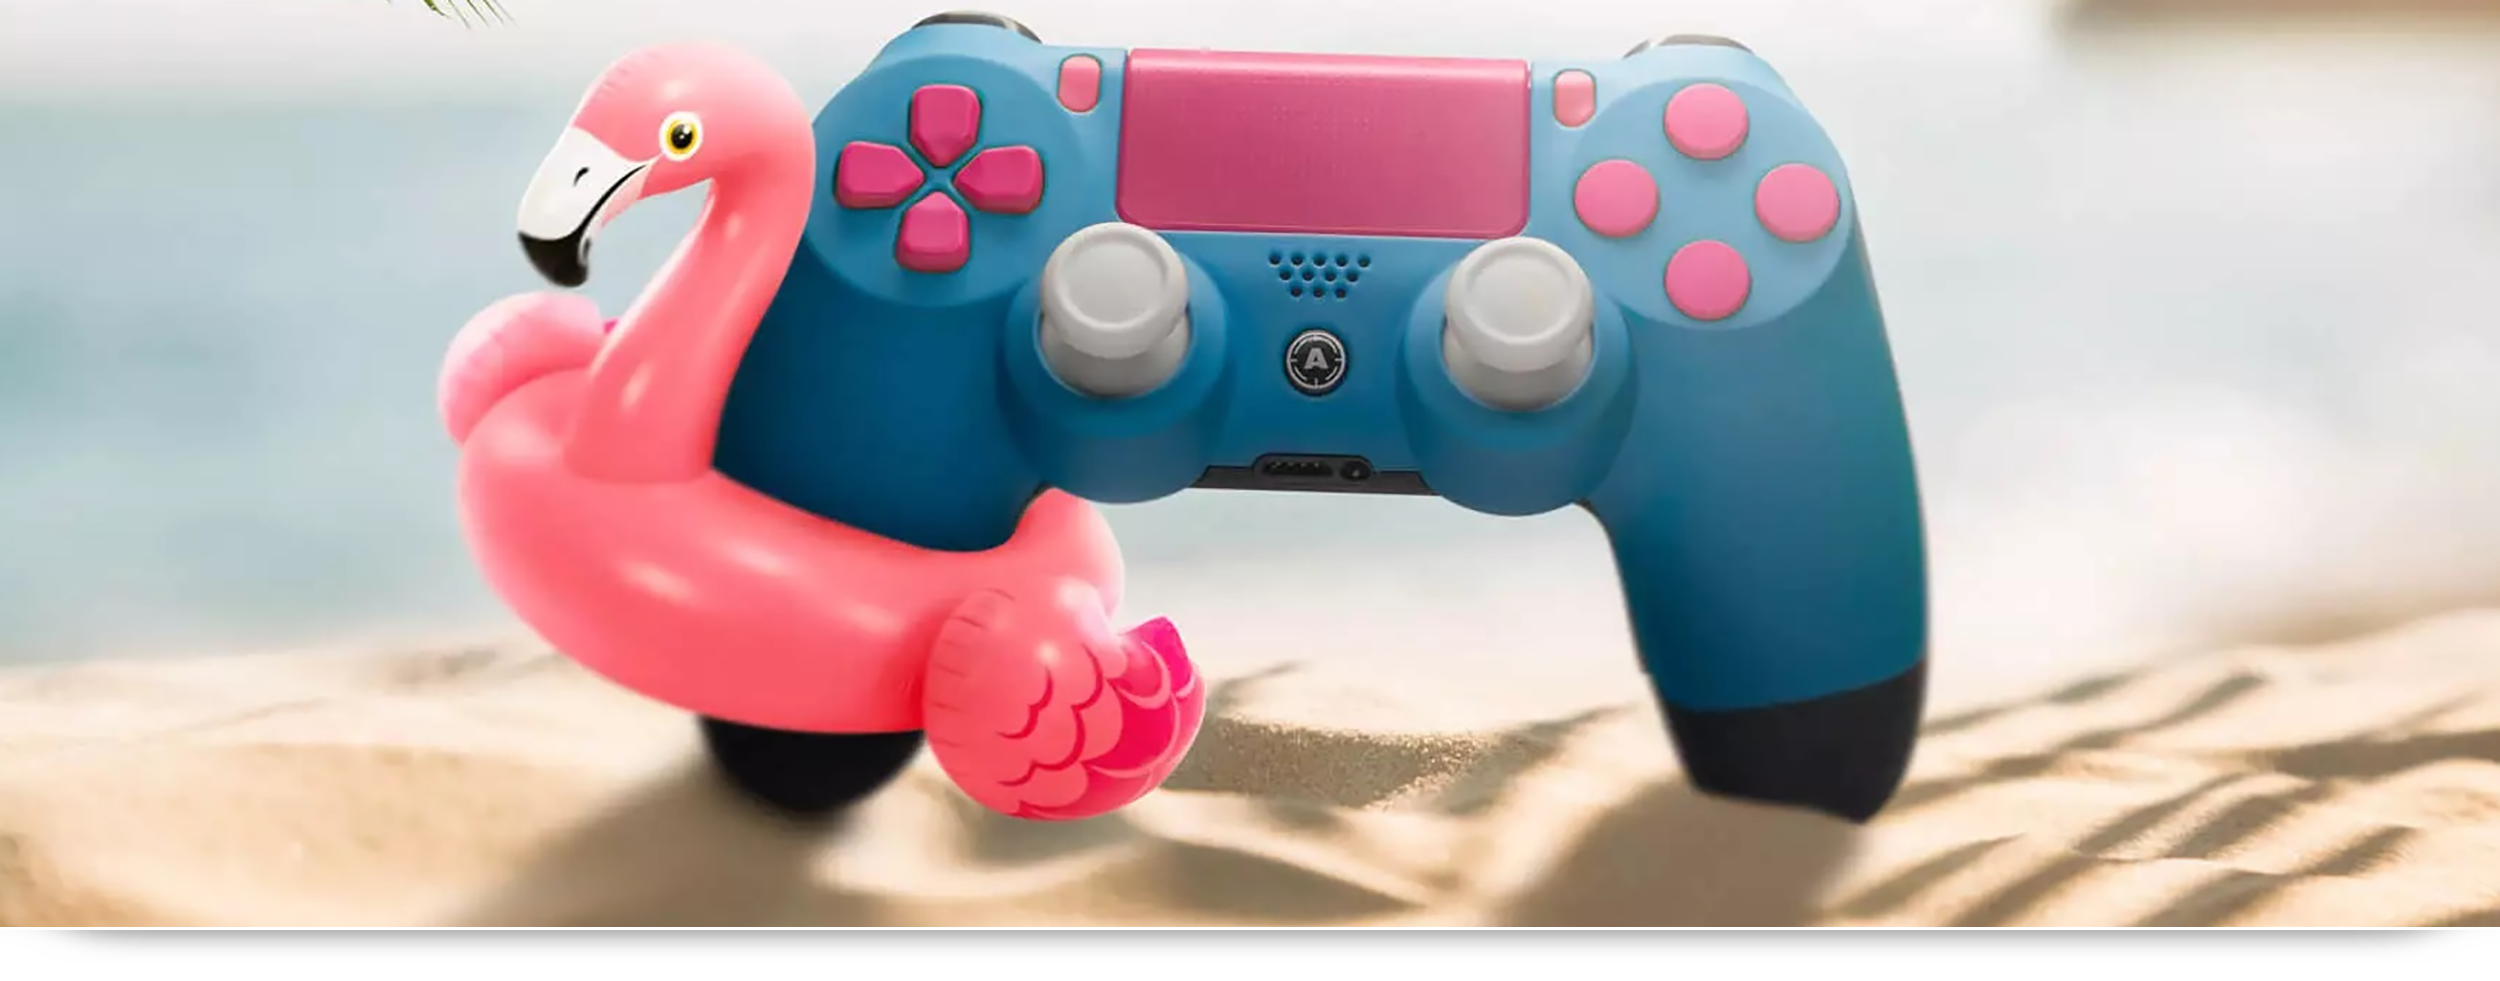 AimControllers Custom PS4 Controller Review | by Jozef Kulik | SUPERJUMP |  Medium